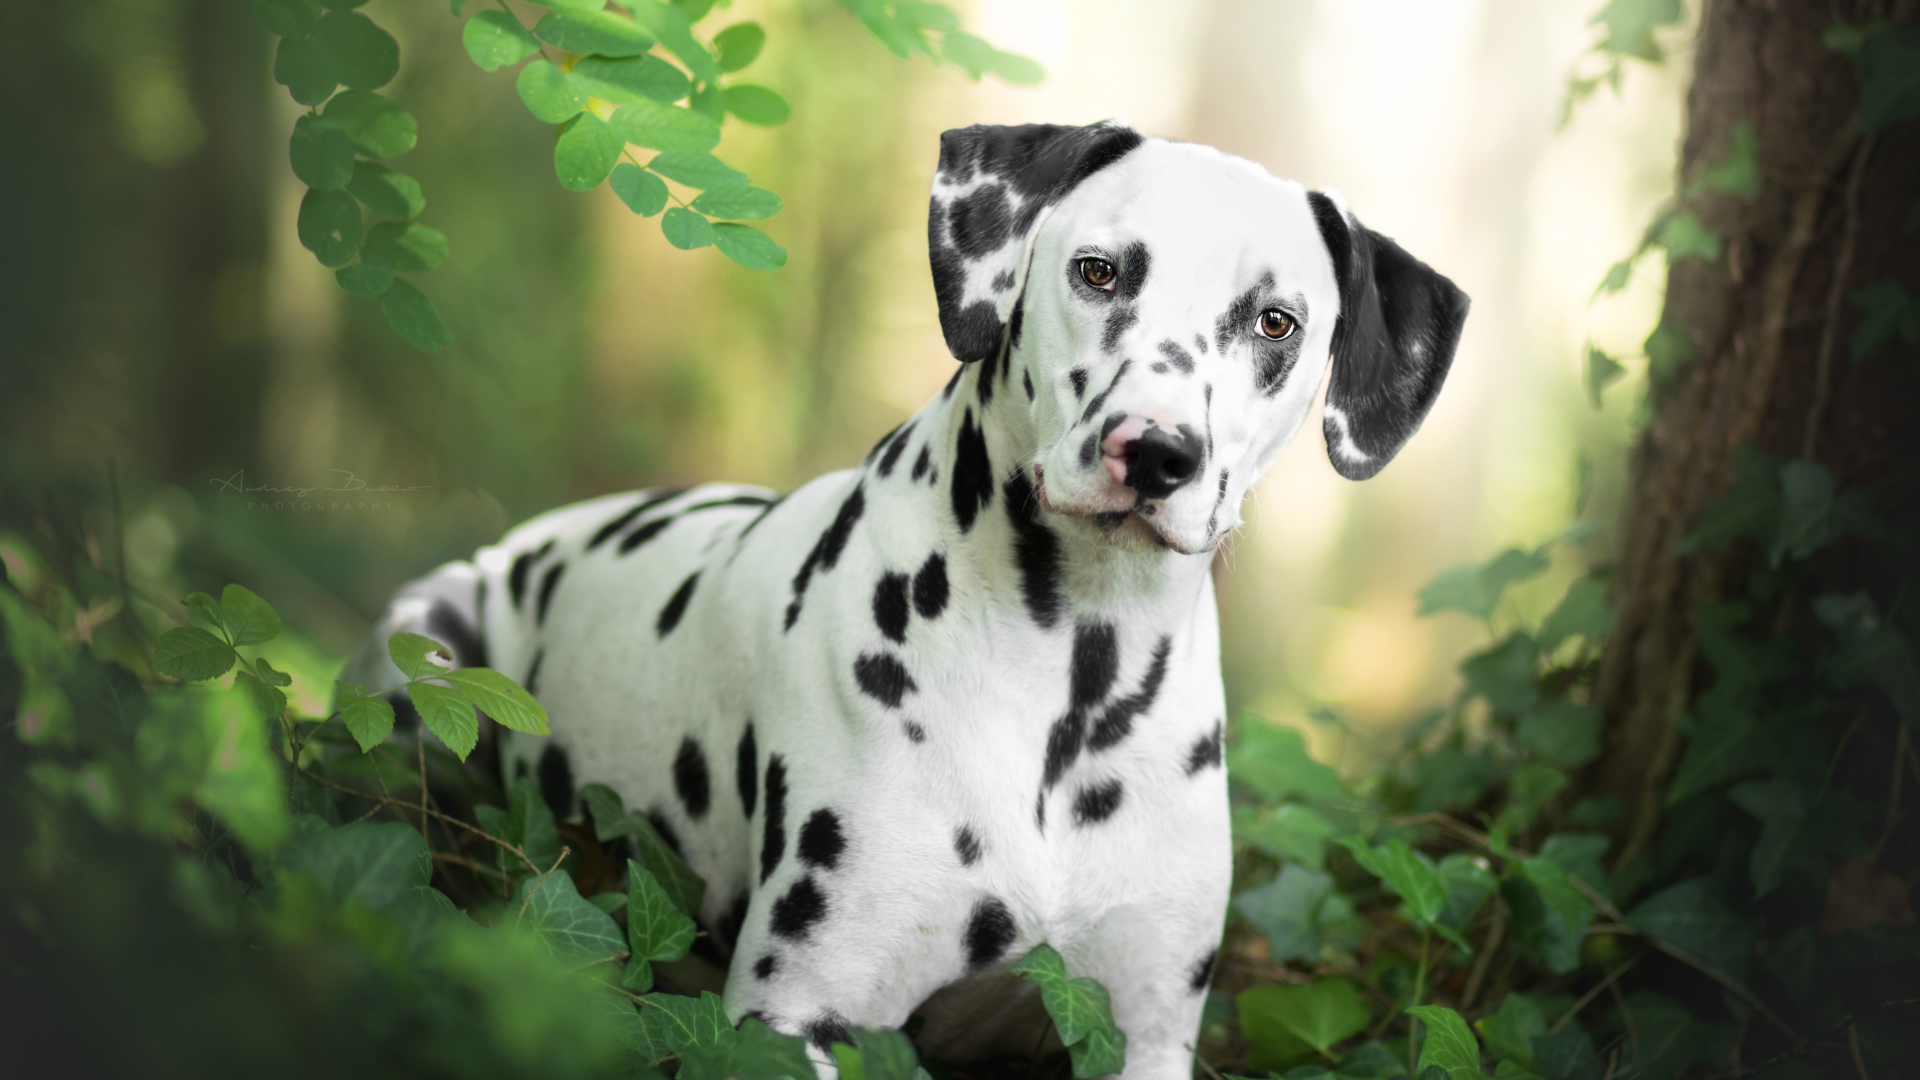 Beautiful spotted dalmatian in green leaves